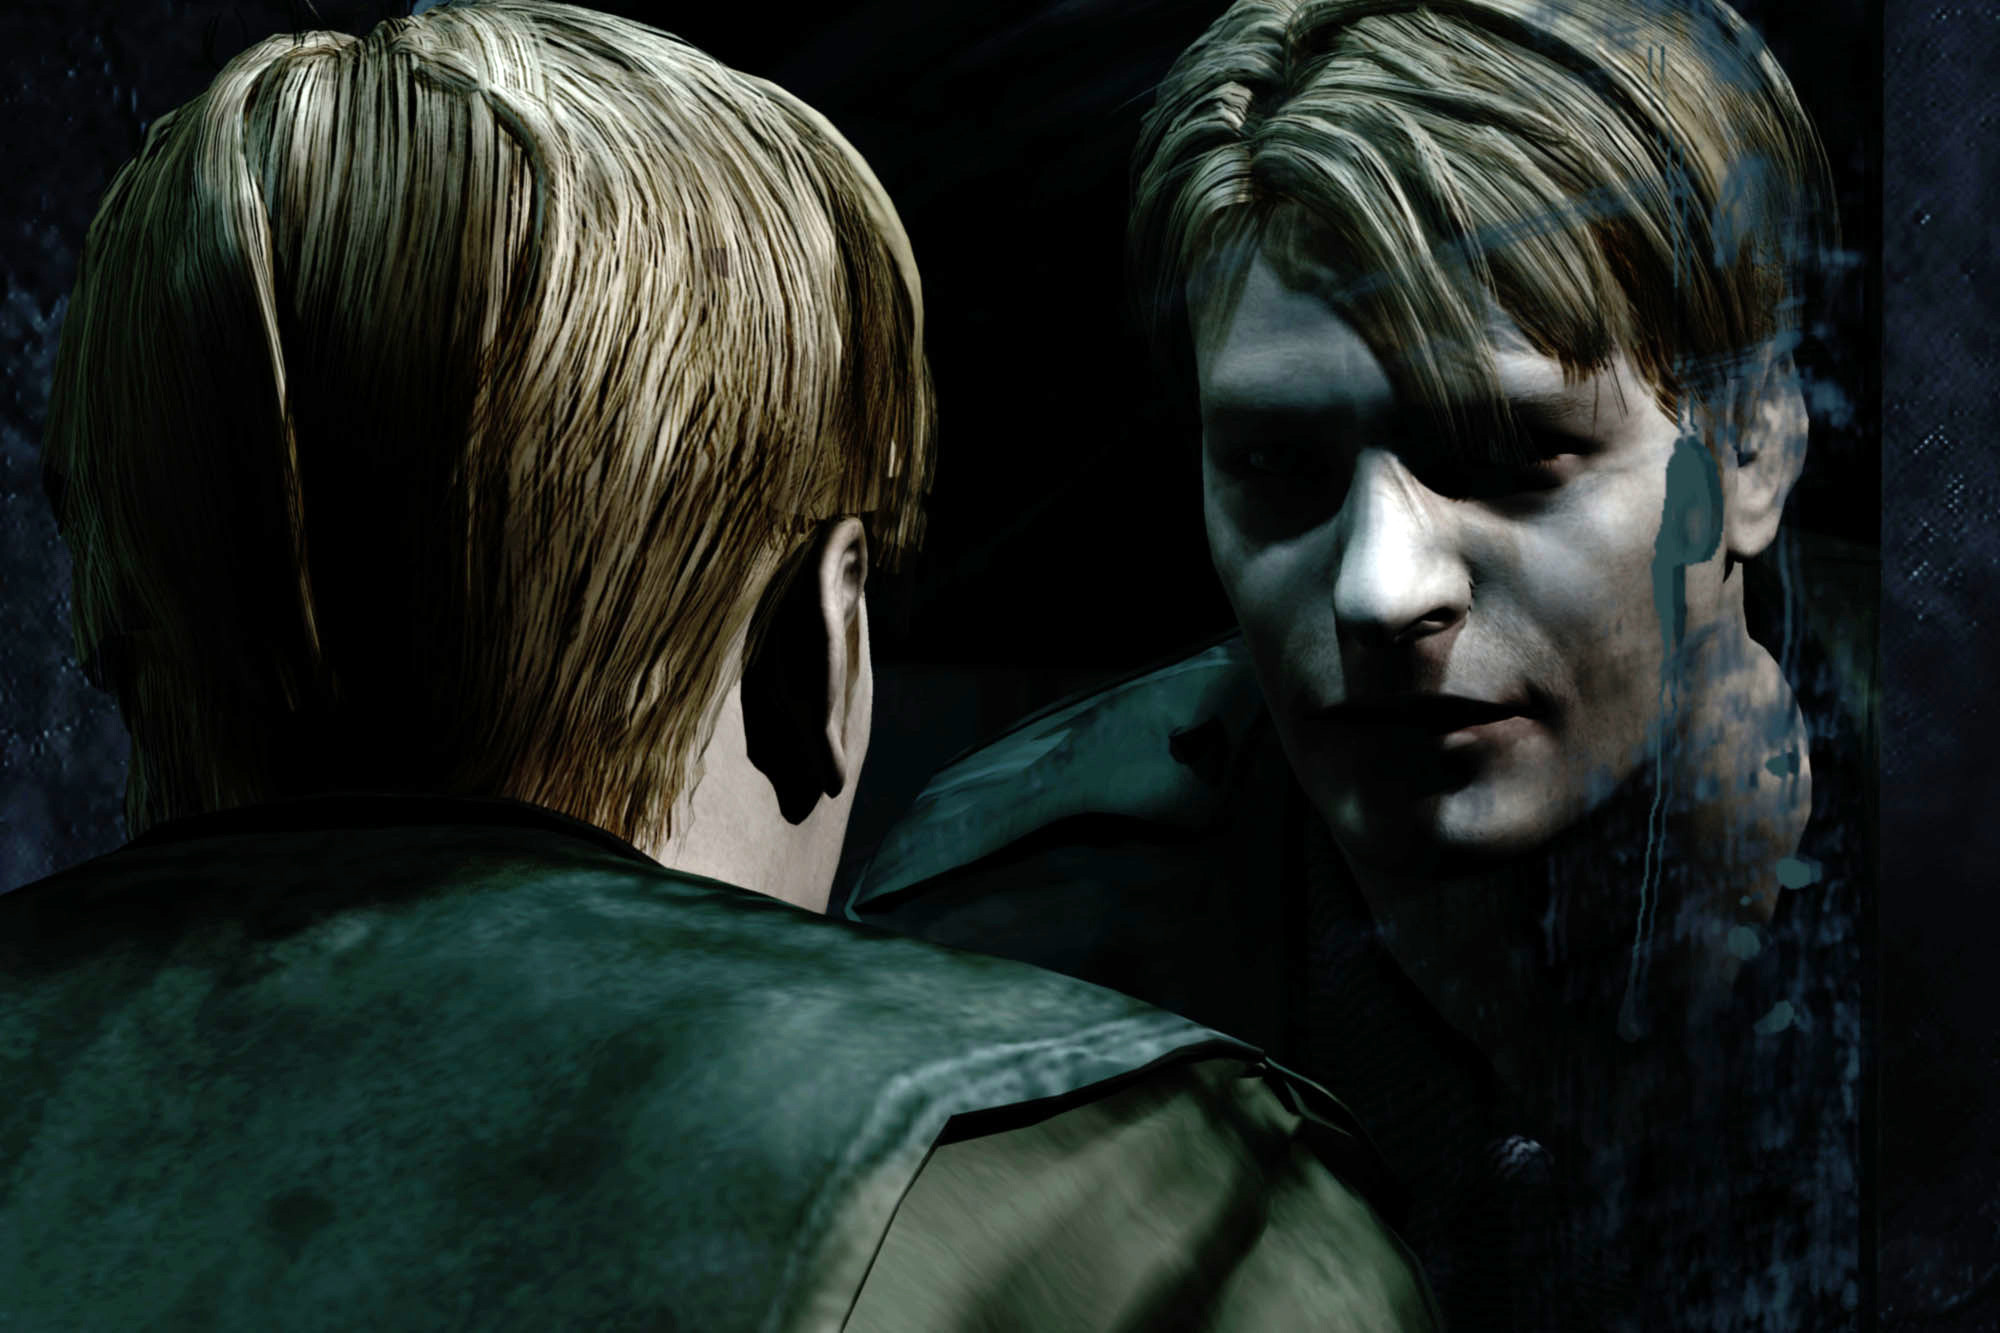 Hideo Kojima Still Being Harassed Over Silent Hill Conspiracies